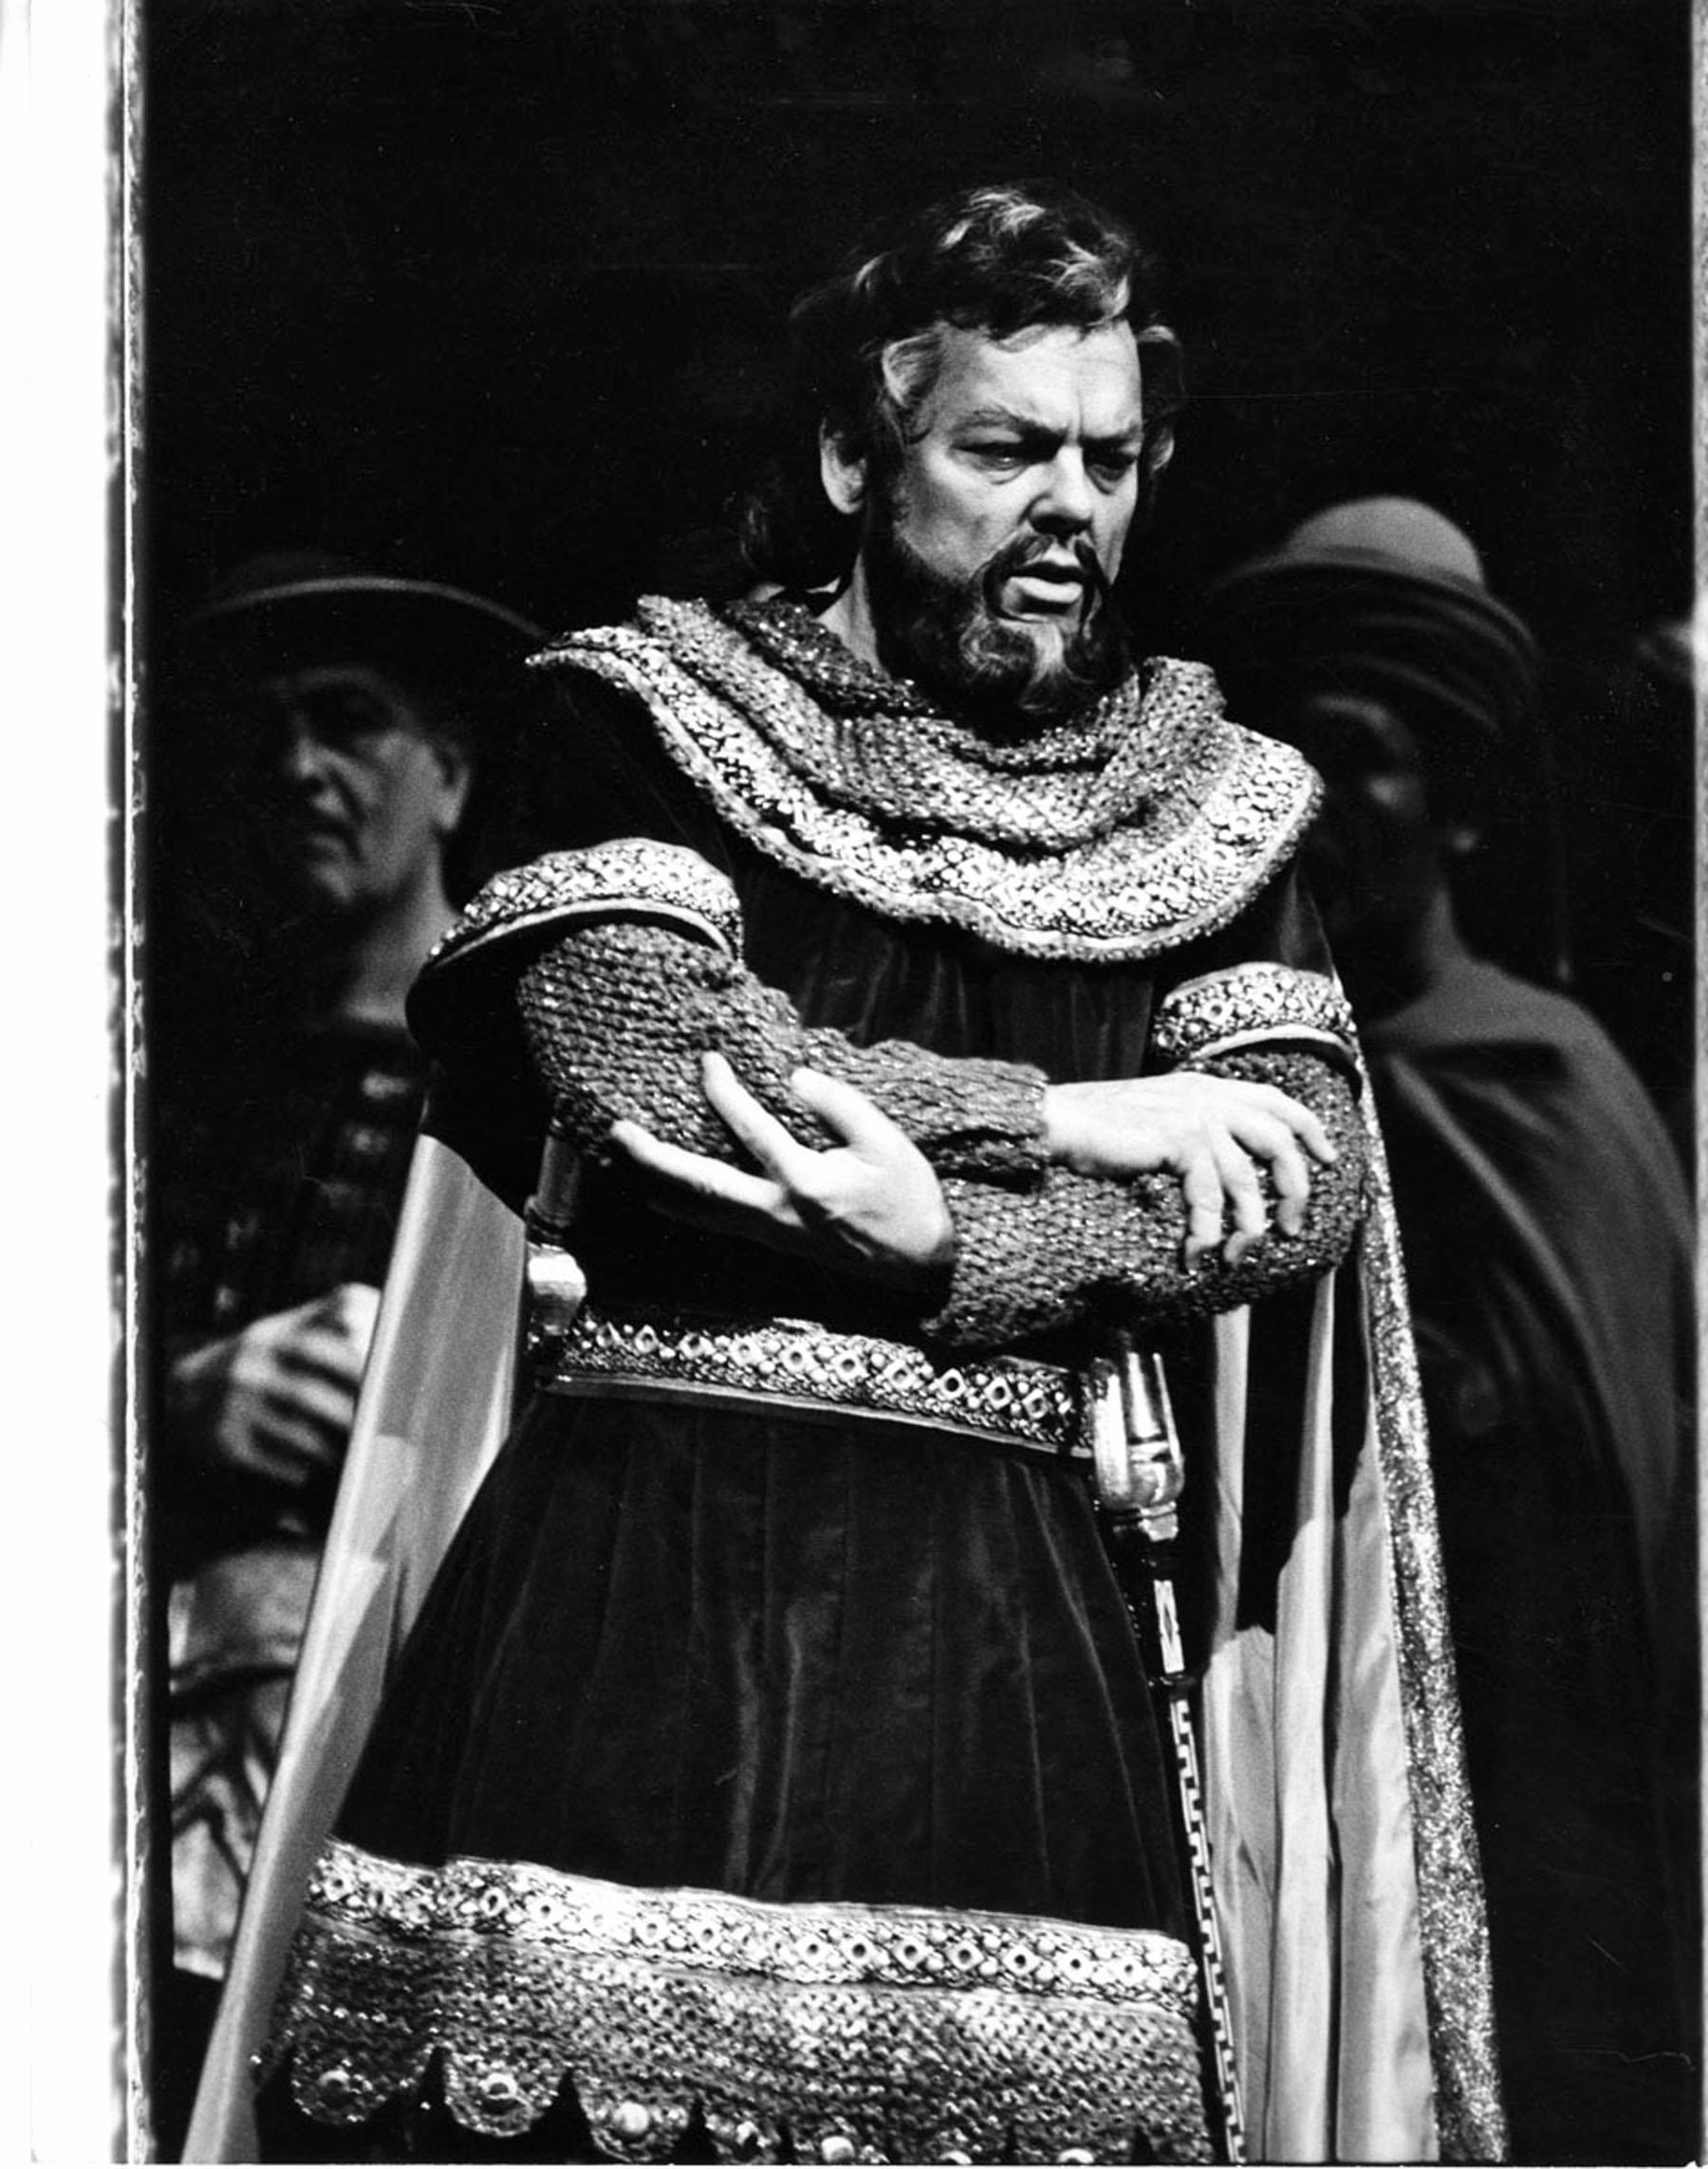 Jack Mitchell Black and White Photograph - Operatic tenor Harry Theyard 'Seige of Corinth' at the MET, signed by Mitchell